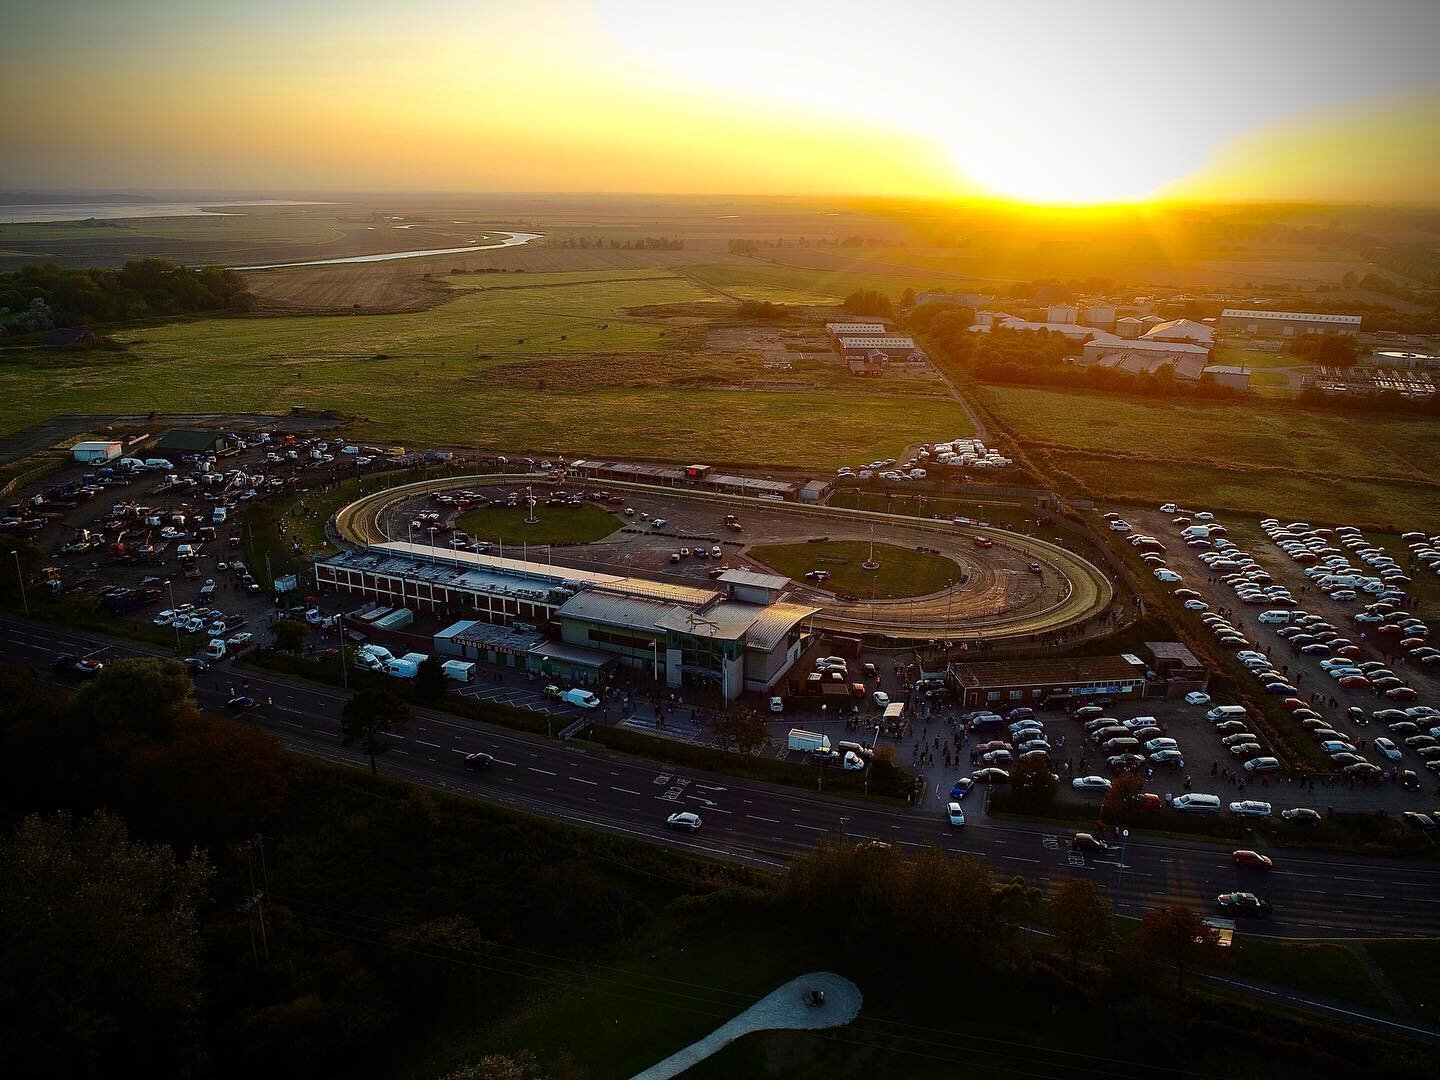 Who doesn&rsquo;t love a sunset! Especially over the racing with @spedeworth_tv ⁣
.⁣
.⁣
.⁣
.⁣
.⁣
#agency #filmmakerslife #cinematography #photographylovers #filmmaking #filmmakerlife #tvcommercial #cinematographer #commercials #production #photo #cin